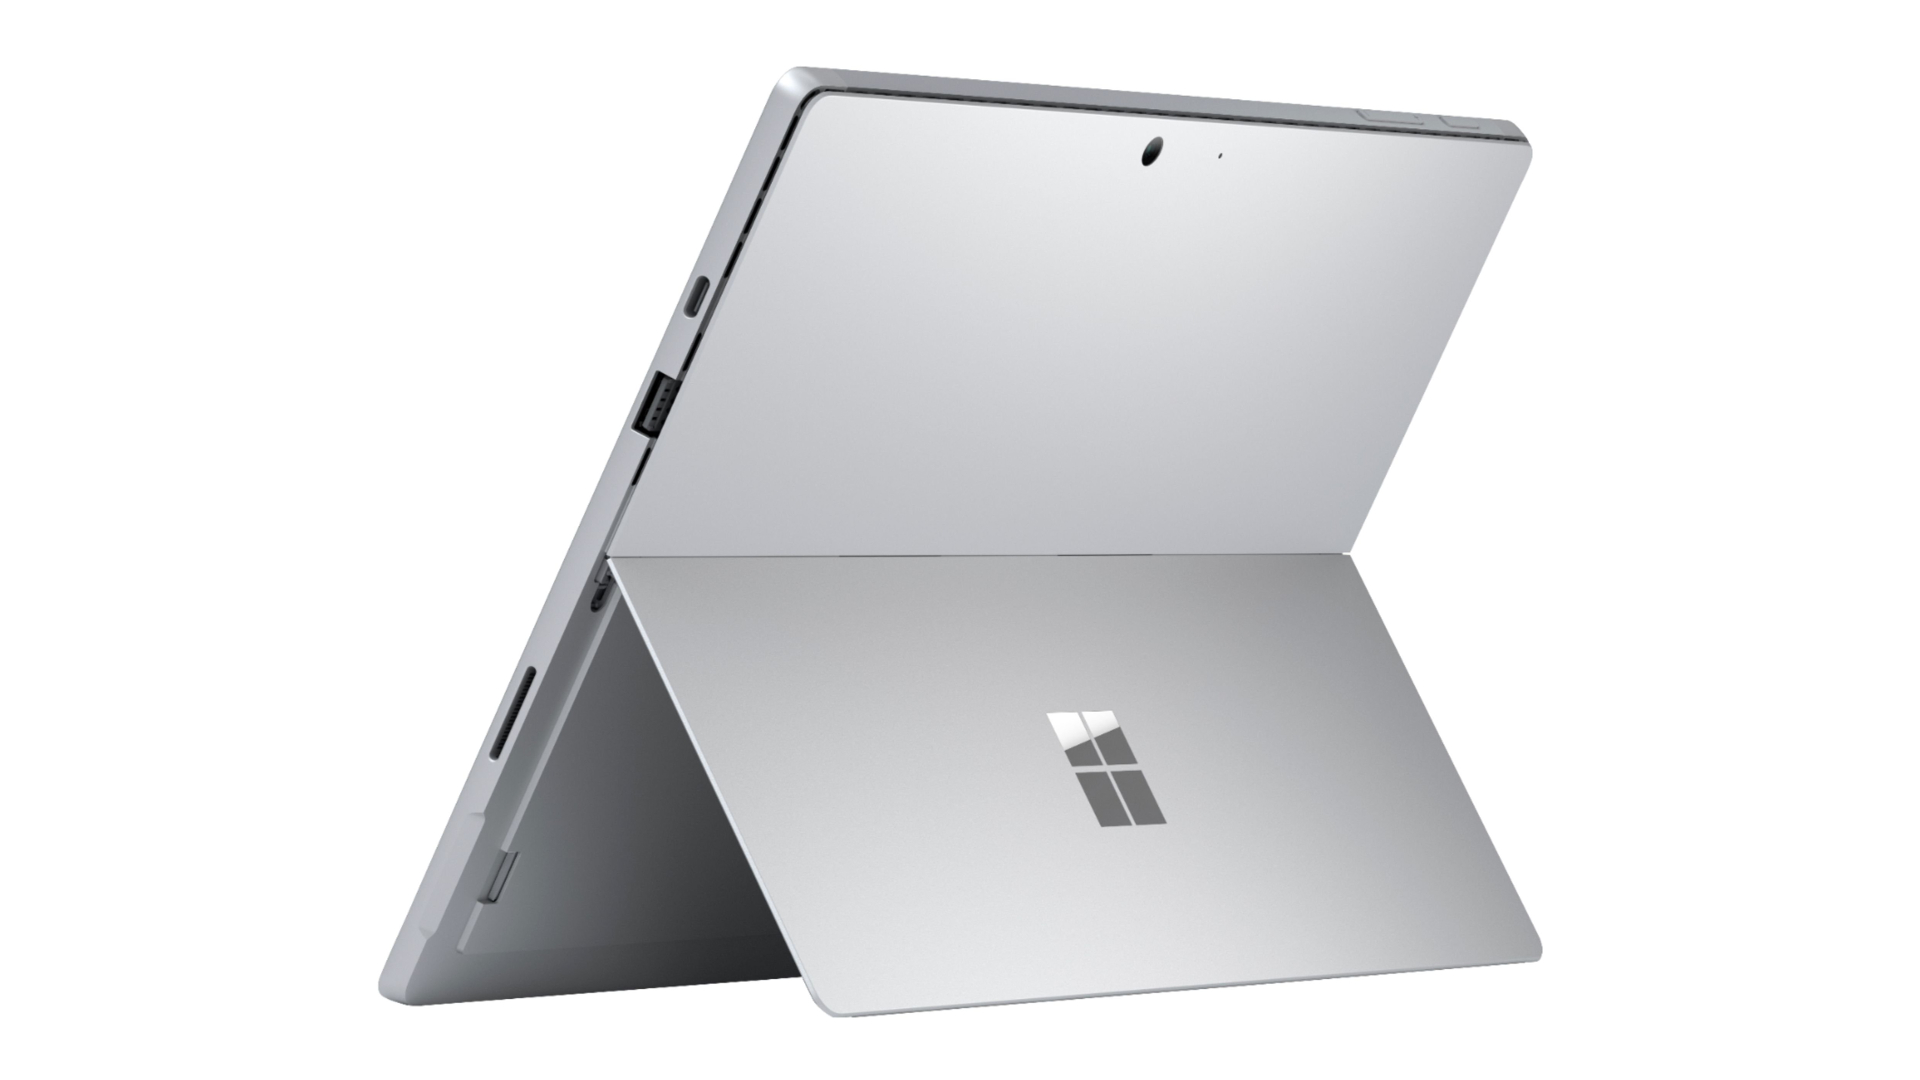 Microsoft Surface Pro 7 Surface Laptop 3 And Arm Powered Surface Are All Revealed In Leaked 